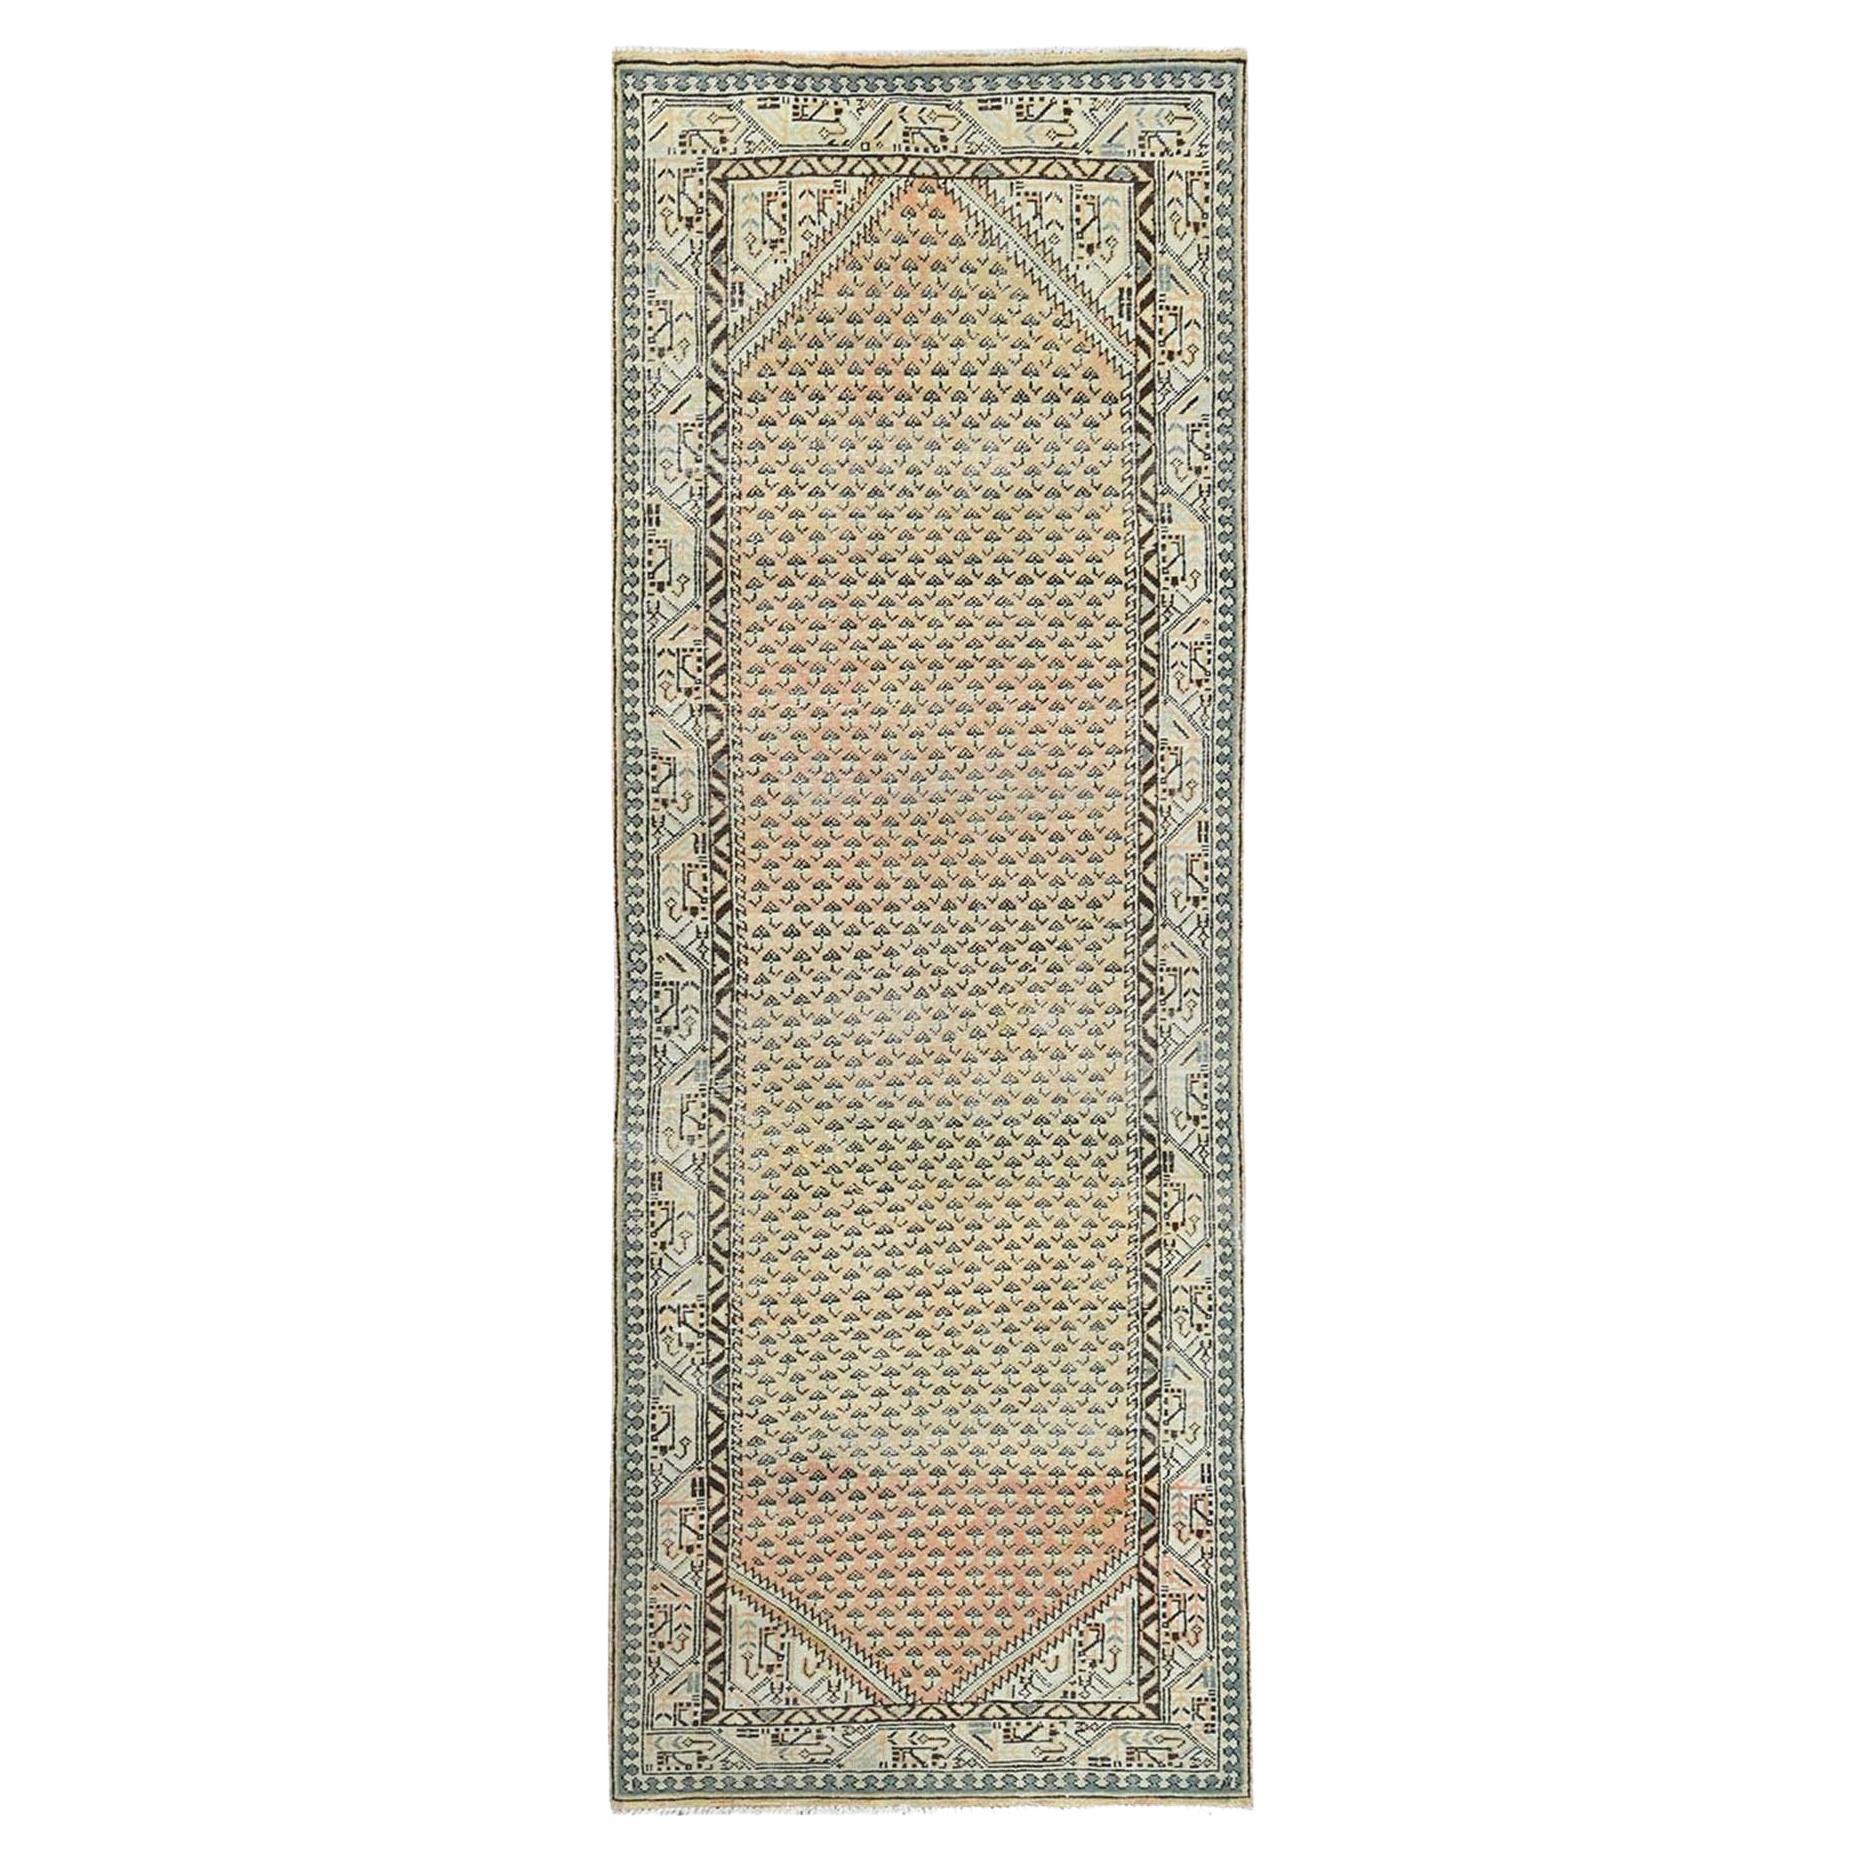 Sand Color Vintage Persian Sarouk Mir Clean Hand Knotted Pure Wool Worn Down Rug For Sale